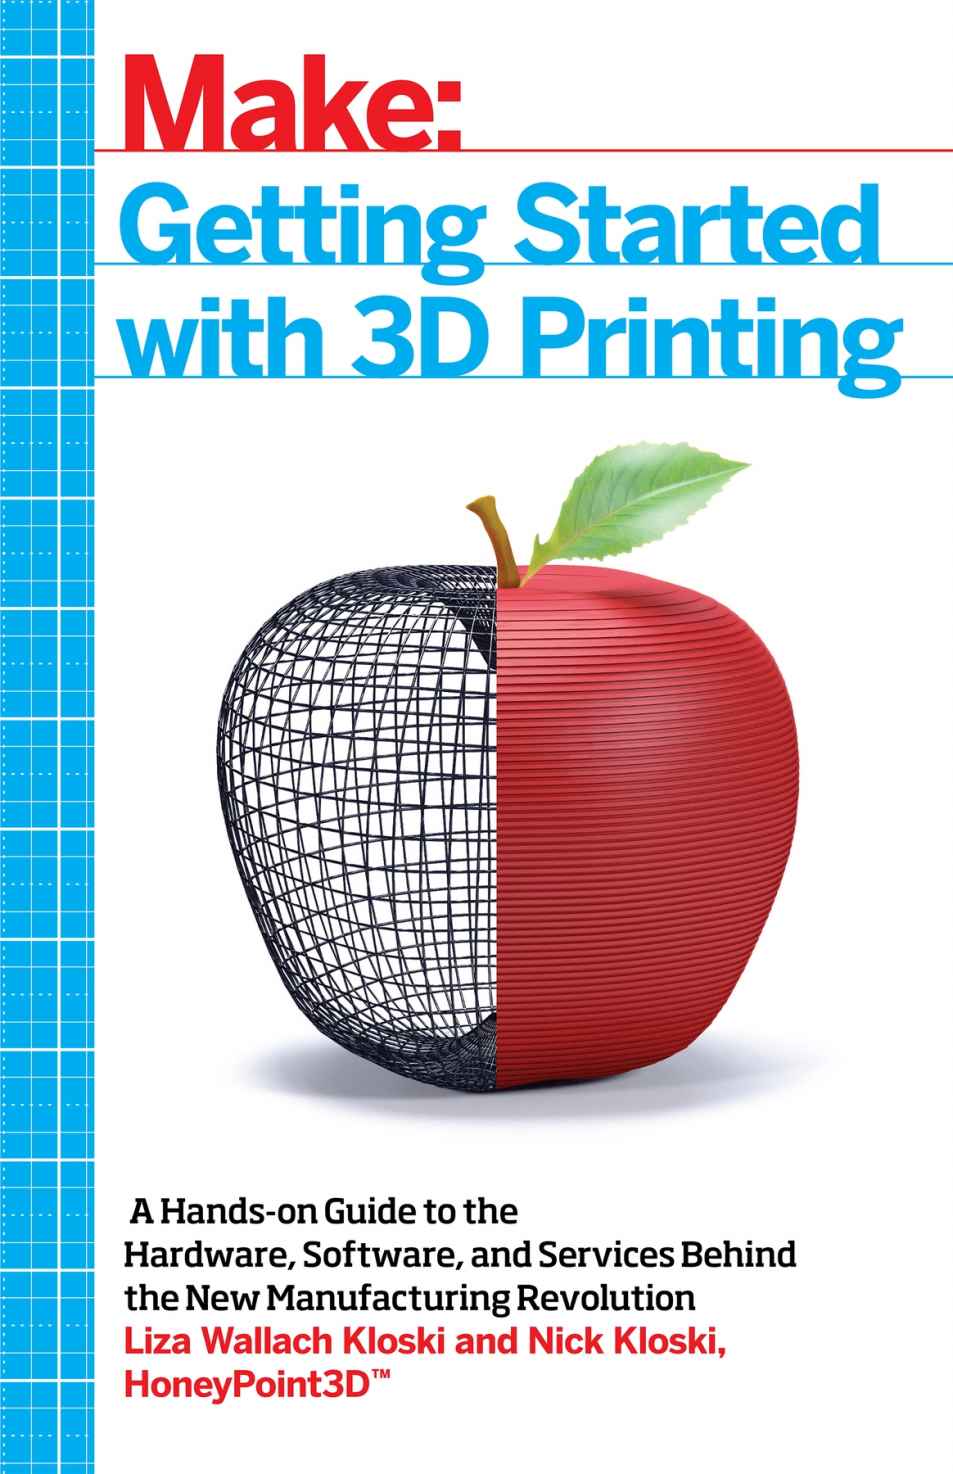 Make:Getting Started with 3D Printing